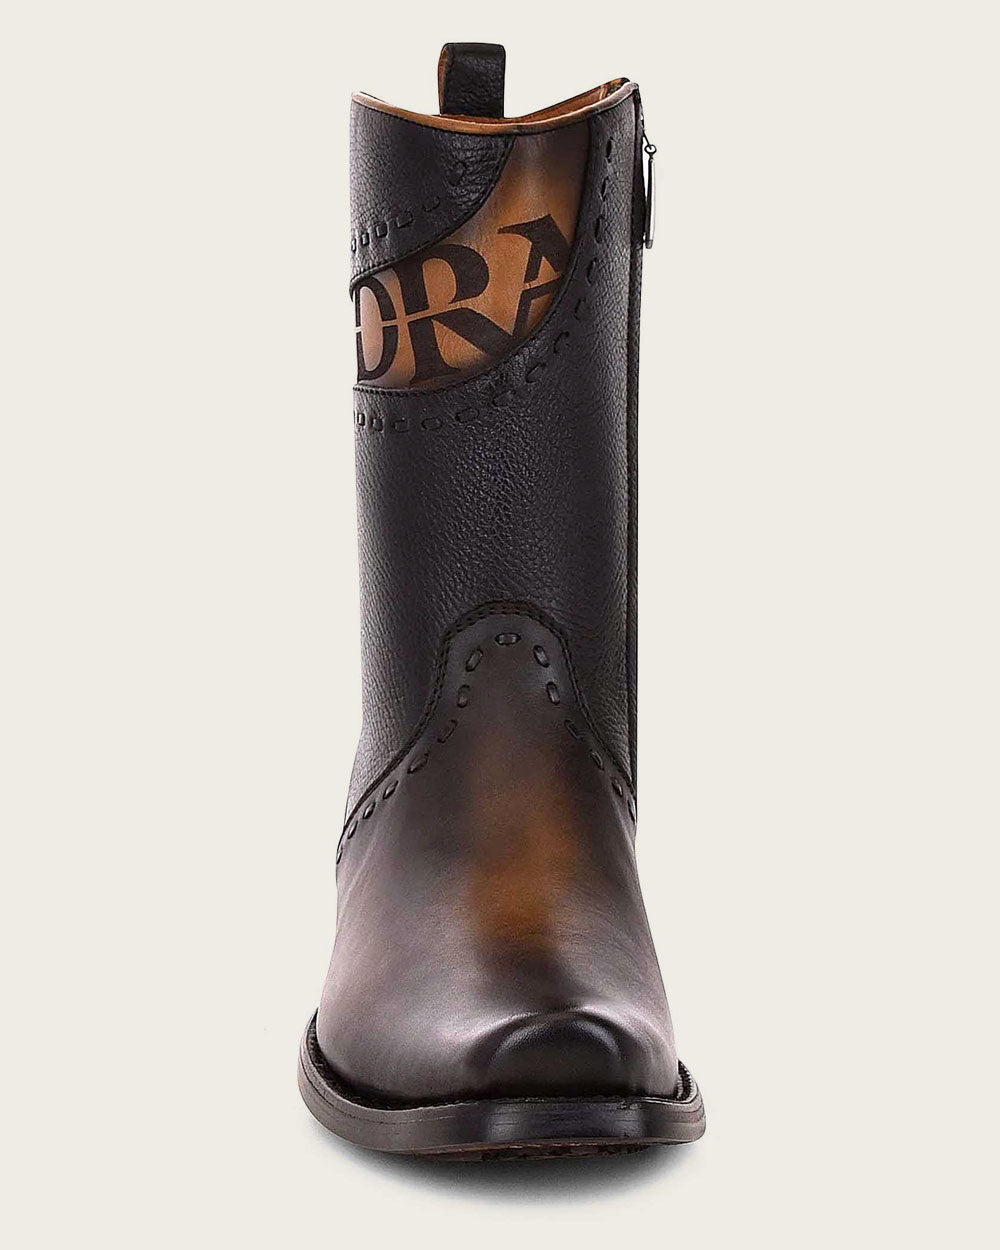 Hand-Painted Design: Each Cuadra brown leather boot is one-of-a-kind.